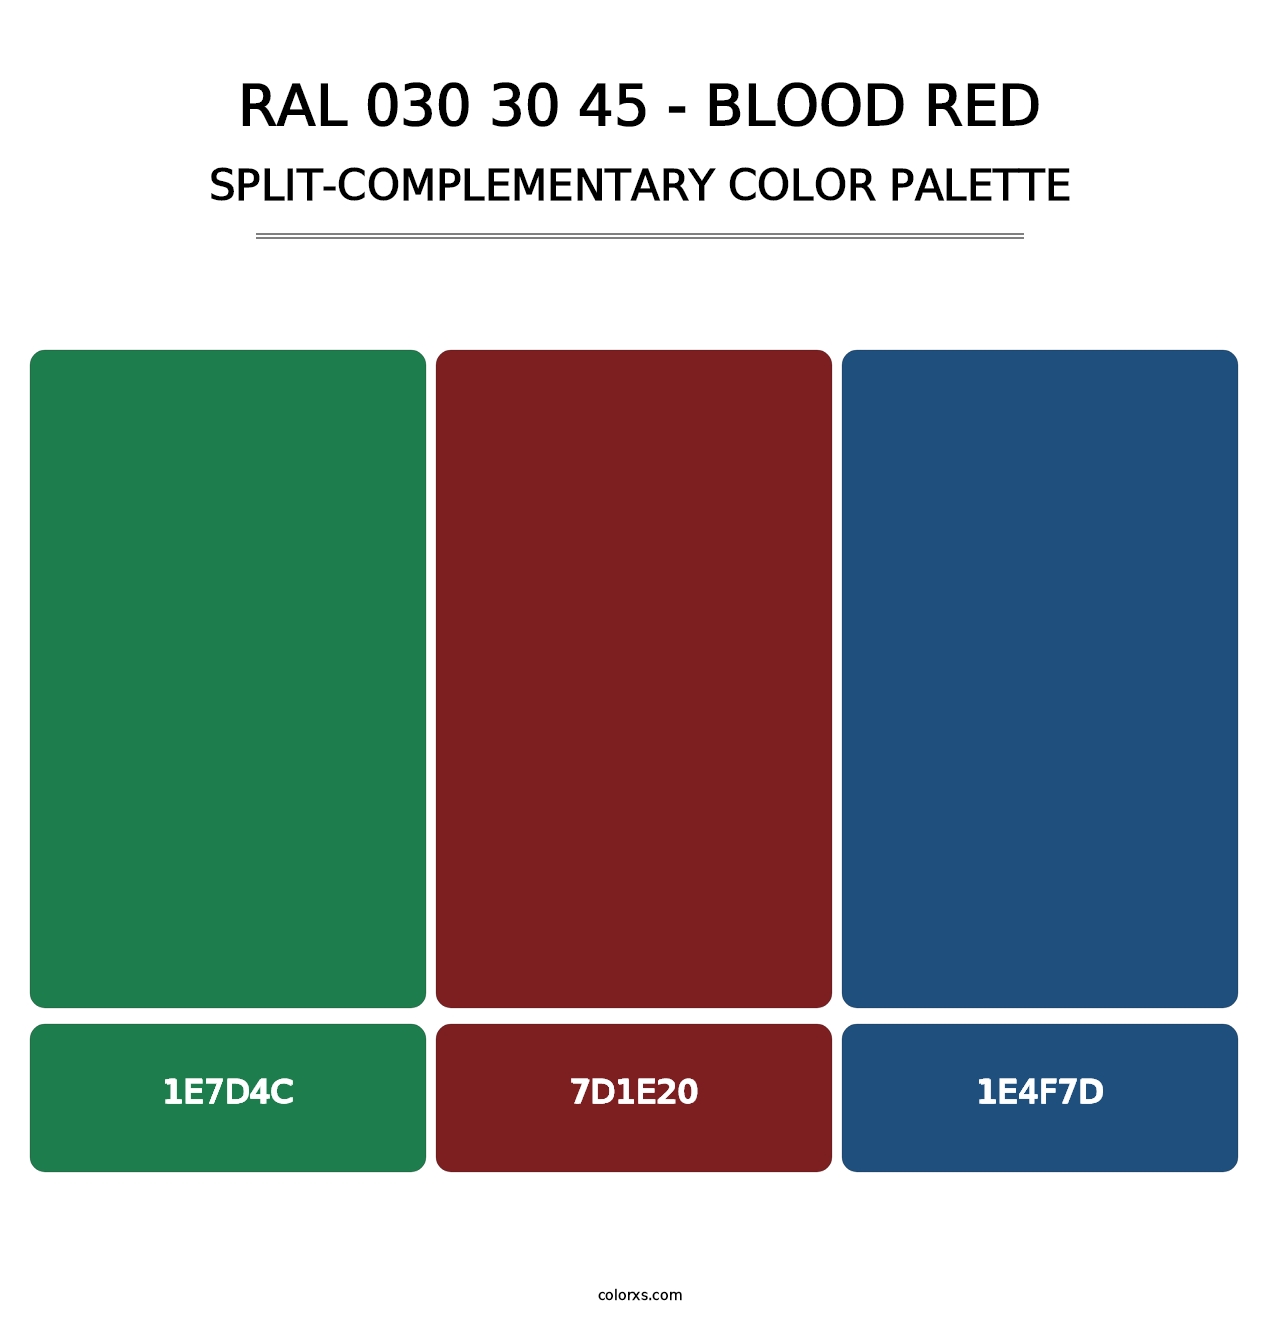 RAL 030 30 45 - Blood Red - Split-Complementary Color Palette